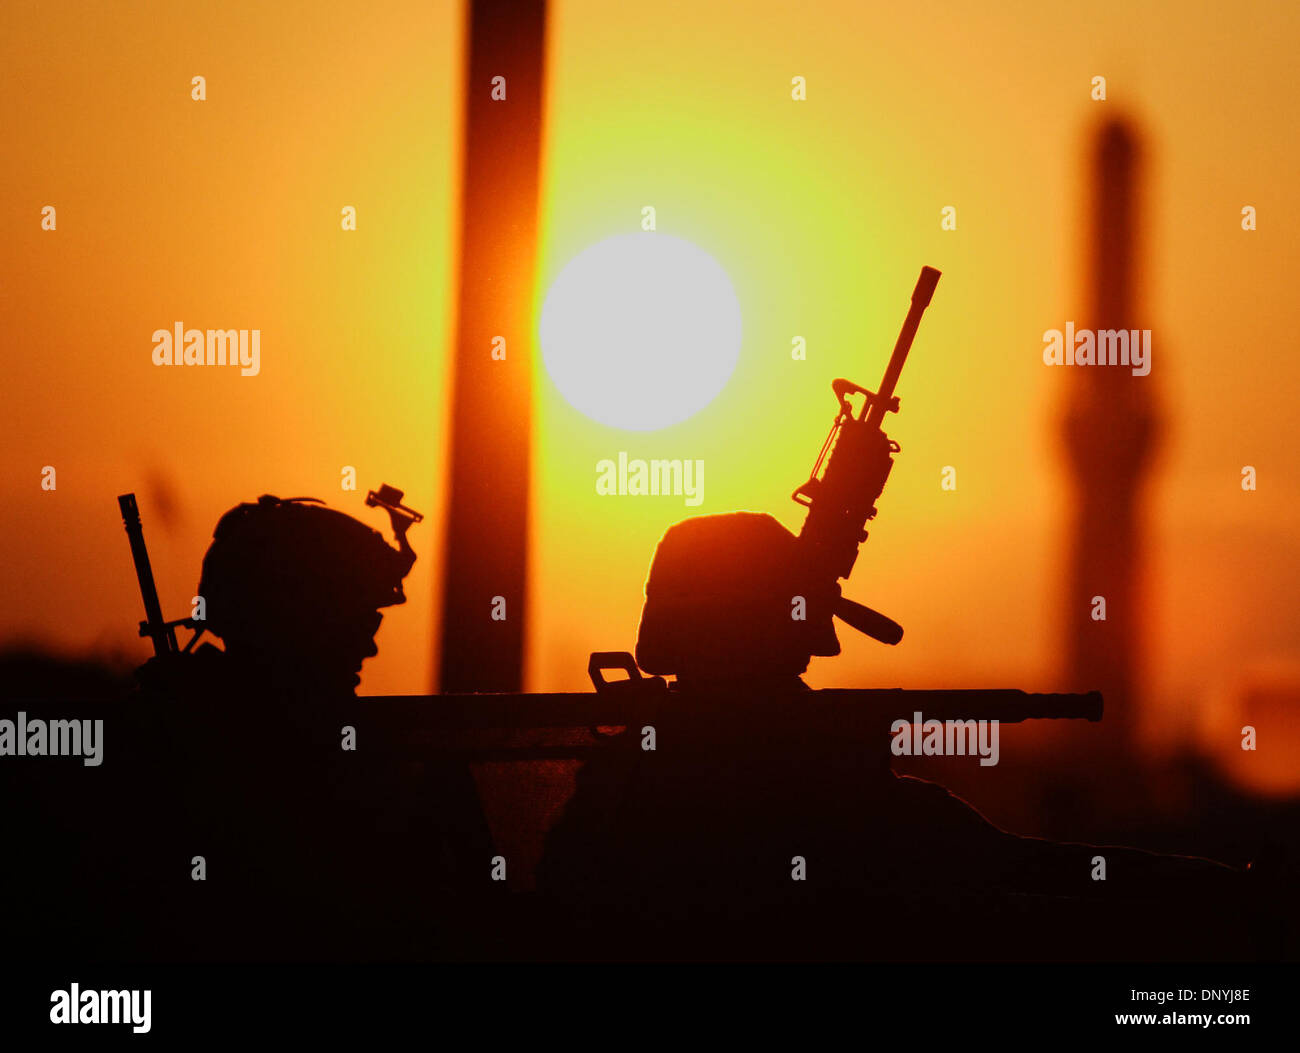 Jan 30, 2006 - Al-Falujah, Iraq - A silhouette of marines with weapons at sunset from Echo Company, Second battalion, 6th Marines, RCT-8, sits in a humvee during a patrol of the city of Falujah. (Credit Image: © Toby Morris/ZUMA Press) Stock Photo